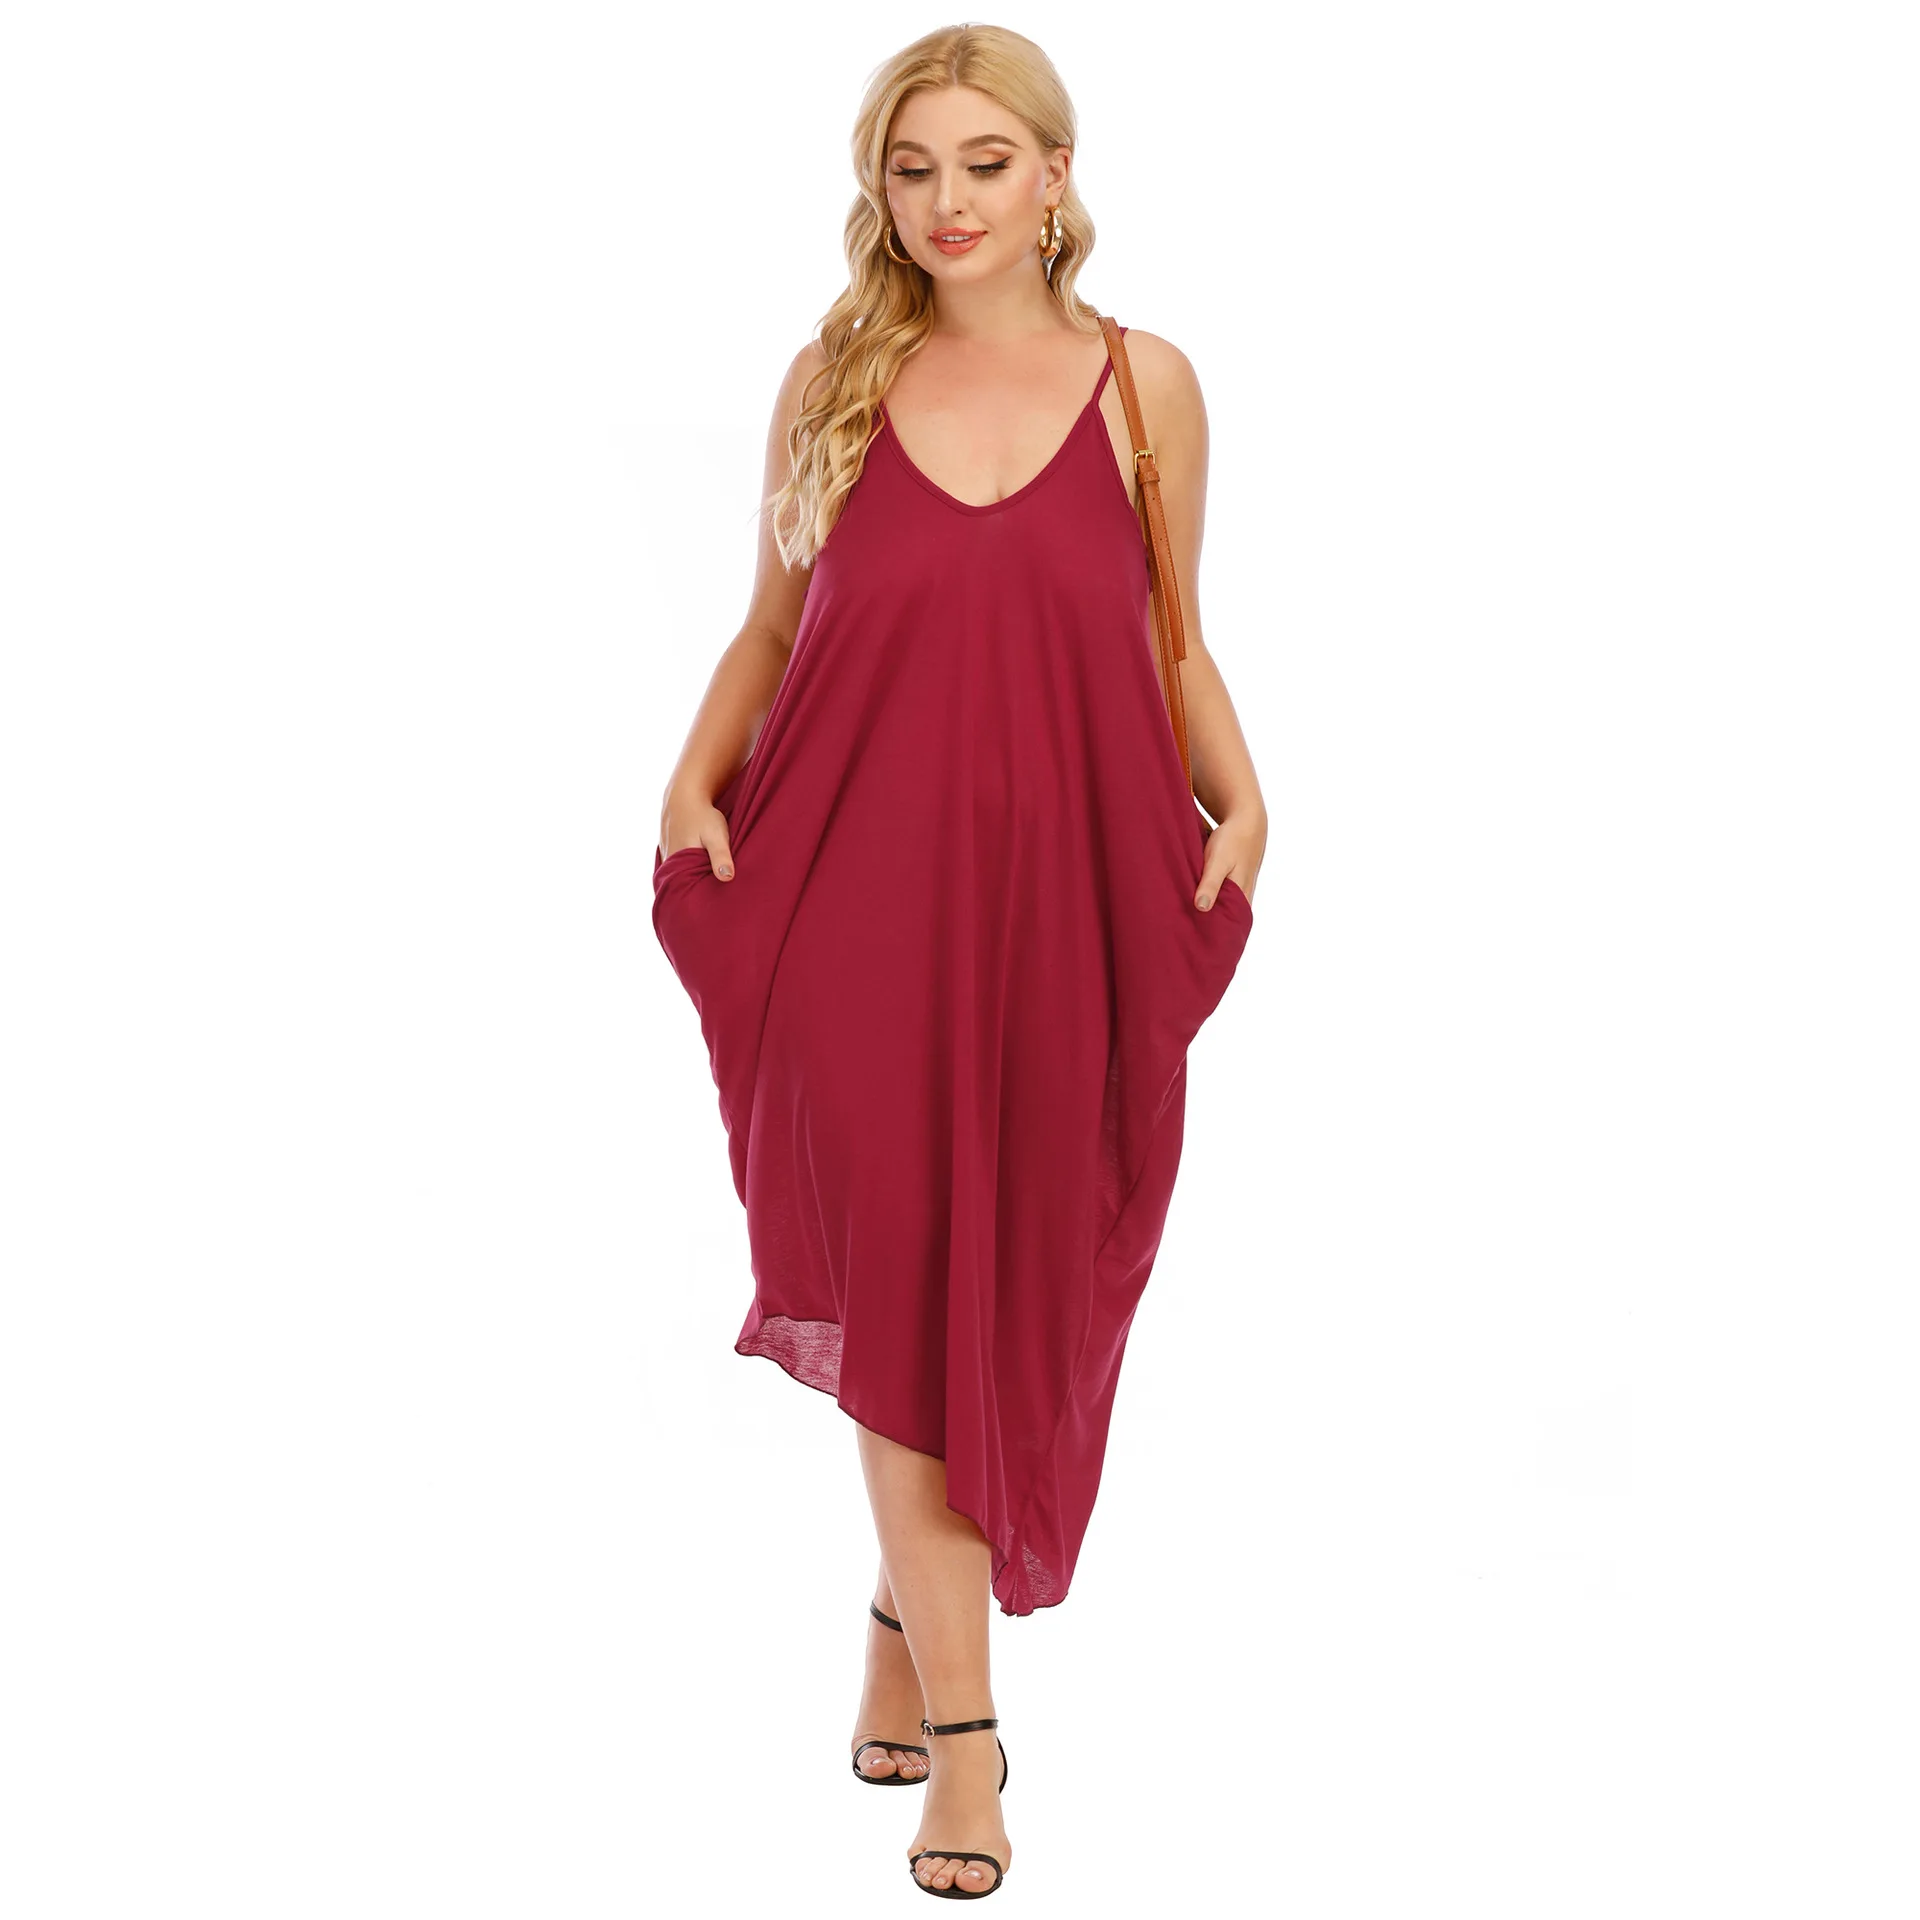 XL-4XL Plus Size Sheer Backless Dress for Women Sexy Outfit Off Shoulder V-neck Midi Slip Dresses Ladies with Pocket Loose Dress